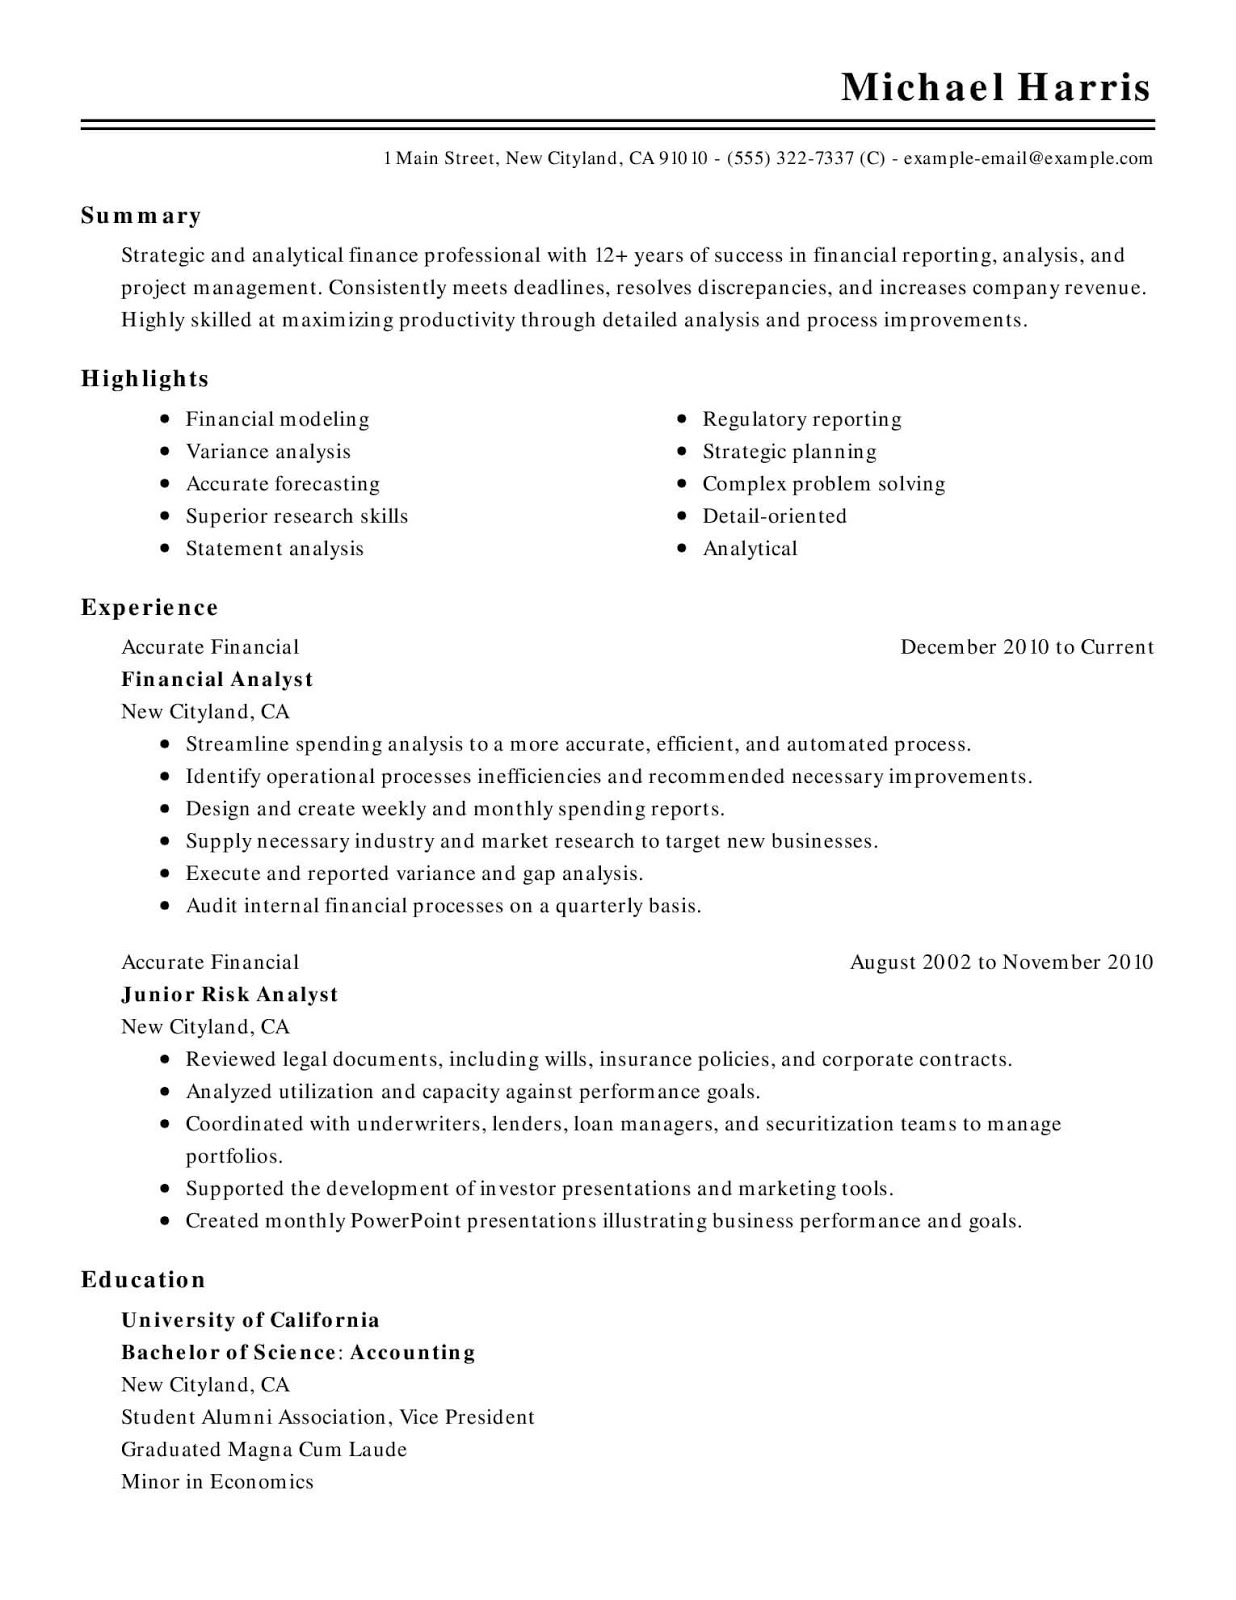 basic resume template word free download free resume template wordpress free resume templates wordpress free resume template word free resume template word document download free resume template word document free resume template word creative free resume templates word download free resume templates word 2018 free resume templates word document free resume templates word 2019 free resume templates word doc